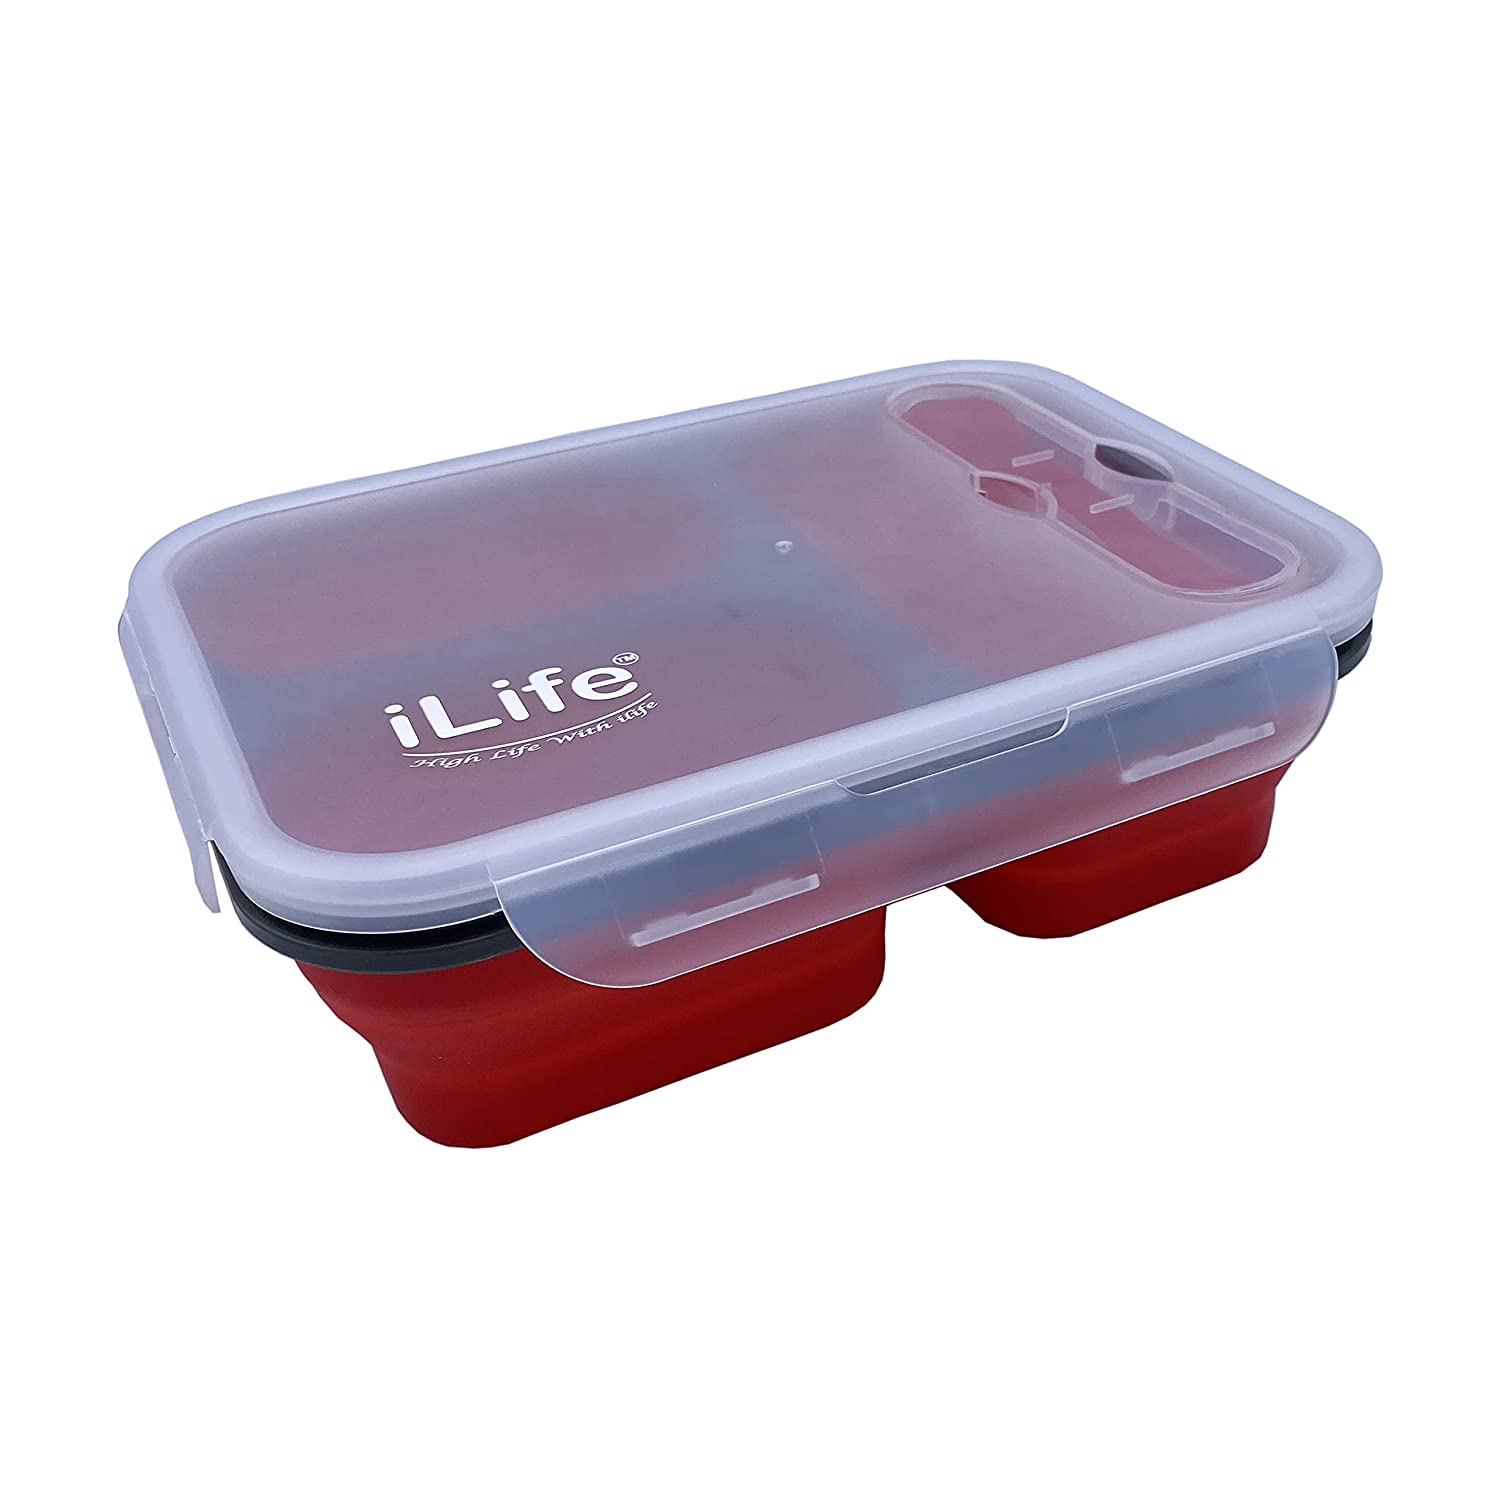 lunch box; expandable lunch box; collapsible lunch box; 3 compartment lunch box